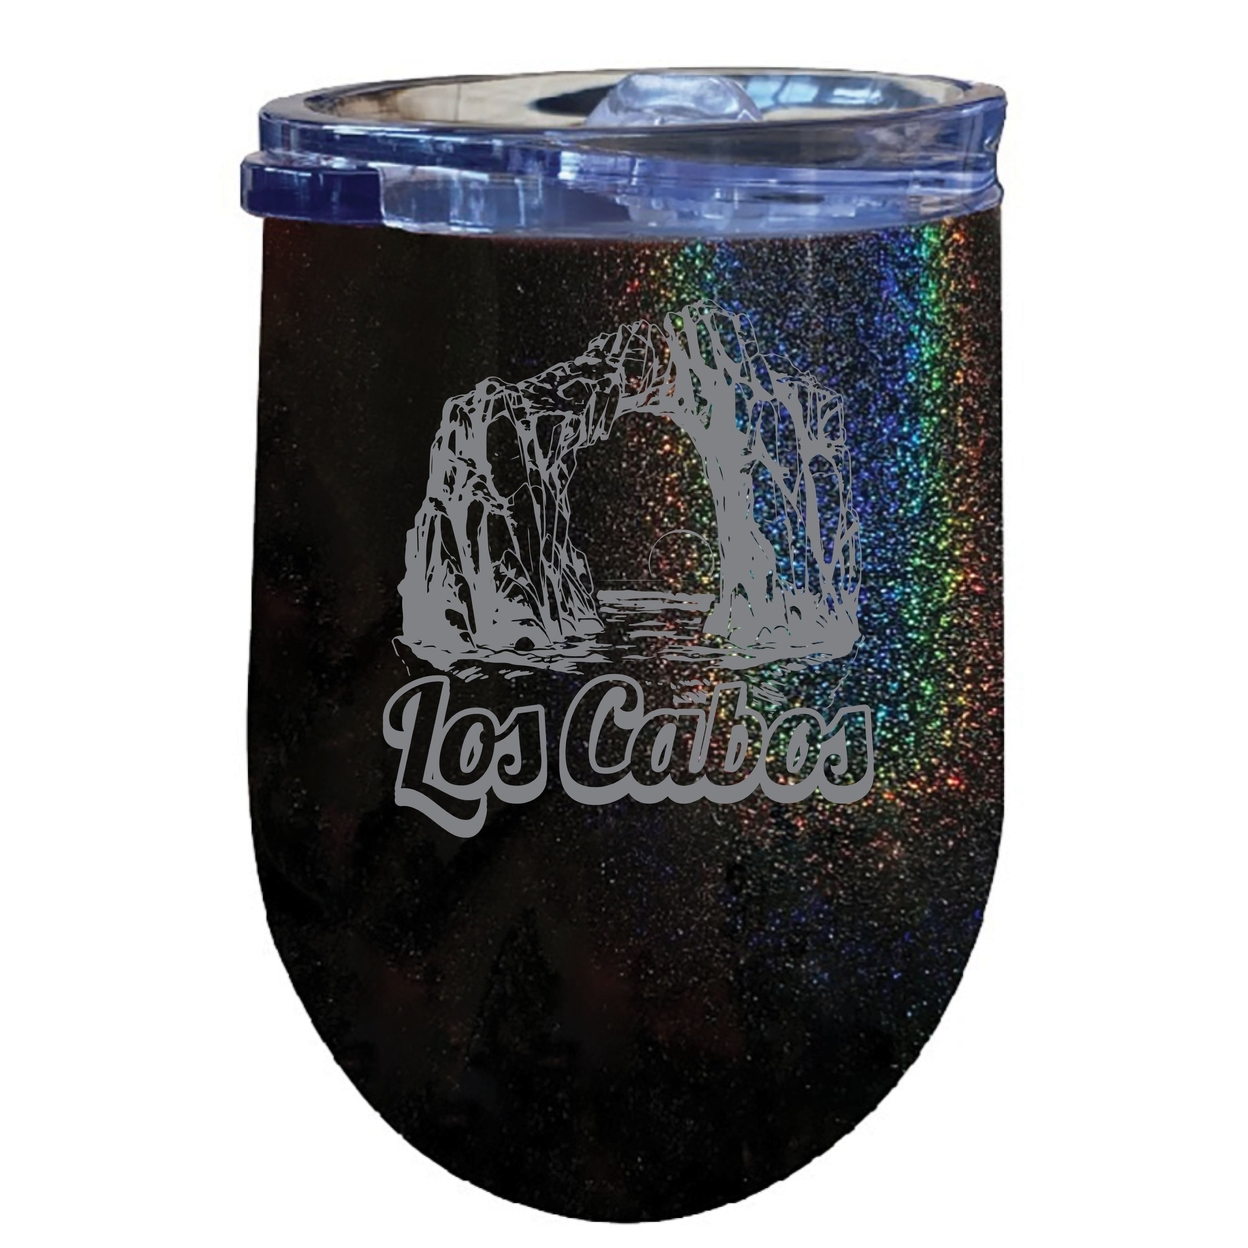 Los Cabos Mexico Souvenir 12 Oz Engraved Insulated Wine Stainless Steel Tumbler - Purple,,2-Pack